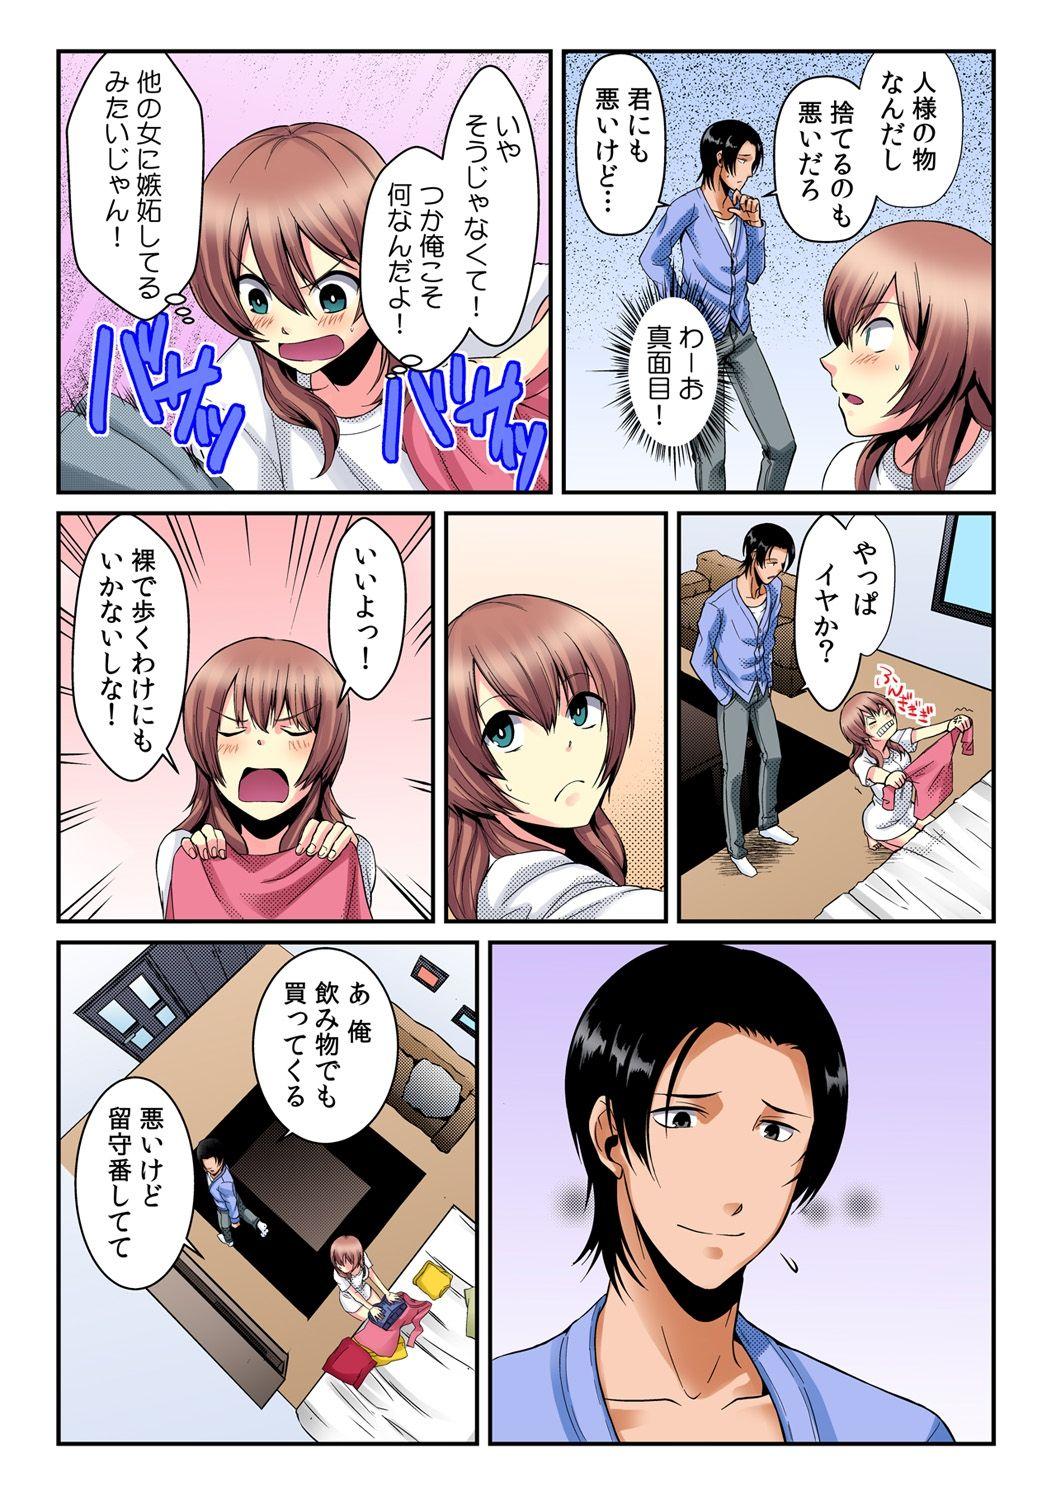 [Akagi Gijou / Akahige] I became a girl- and I definitely can't let anyone find out! (Full color) 2 5